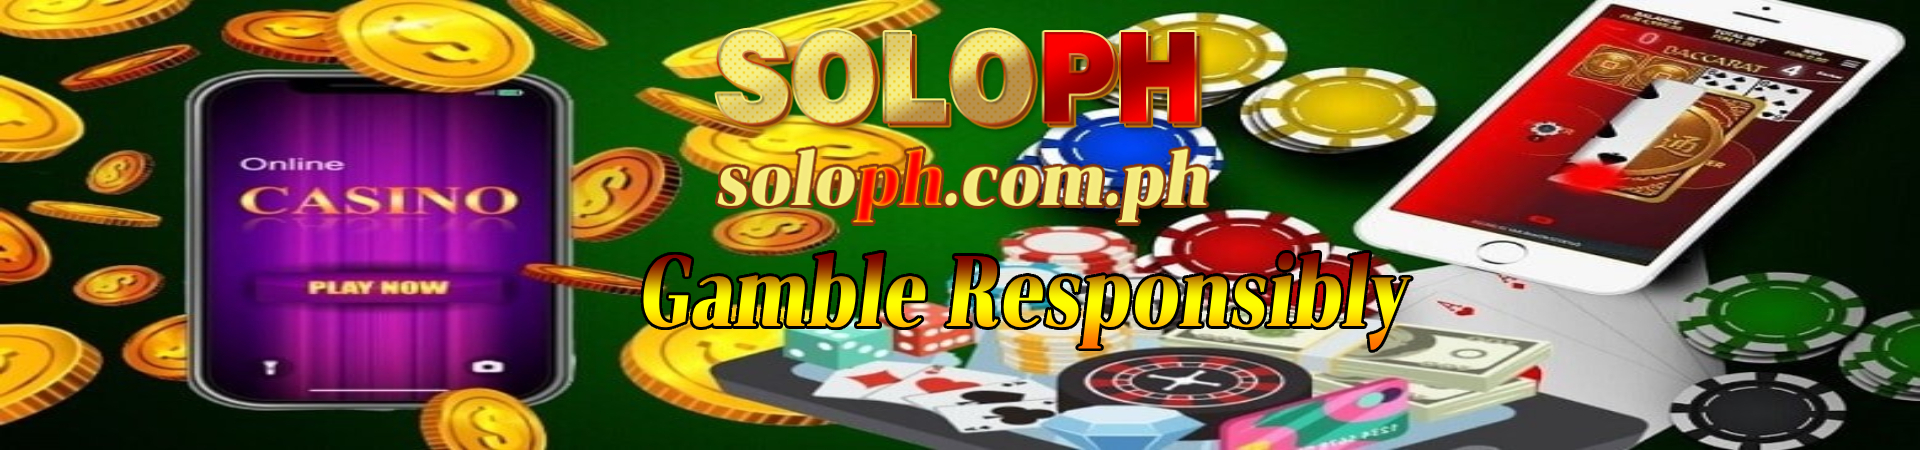 gamble responsibly soloph banner